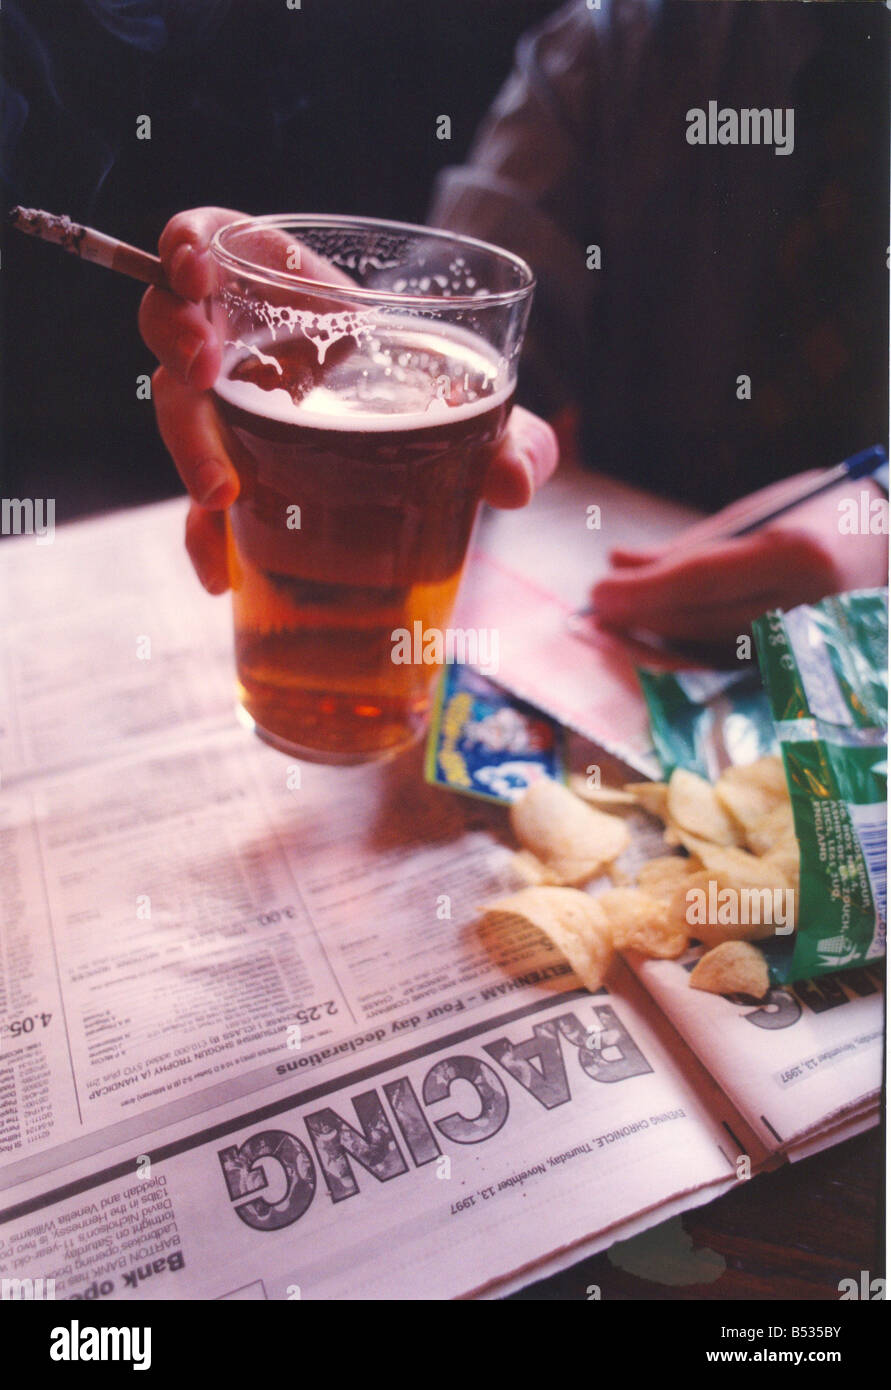 Four deadly sins smoking drinking pints of beer and gambling with a bit of junk food crisps thrown in Stock Photo